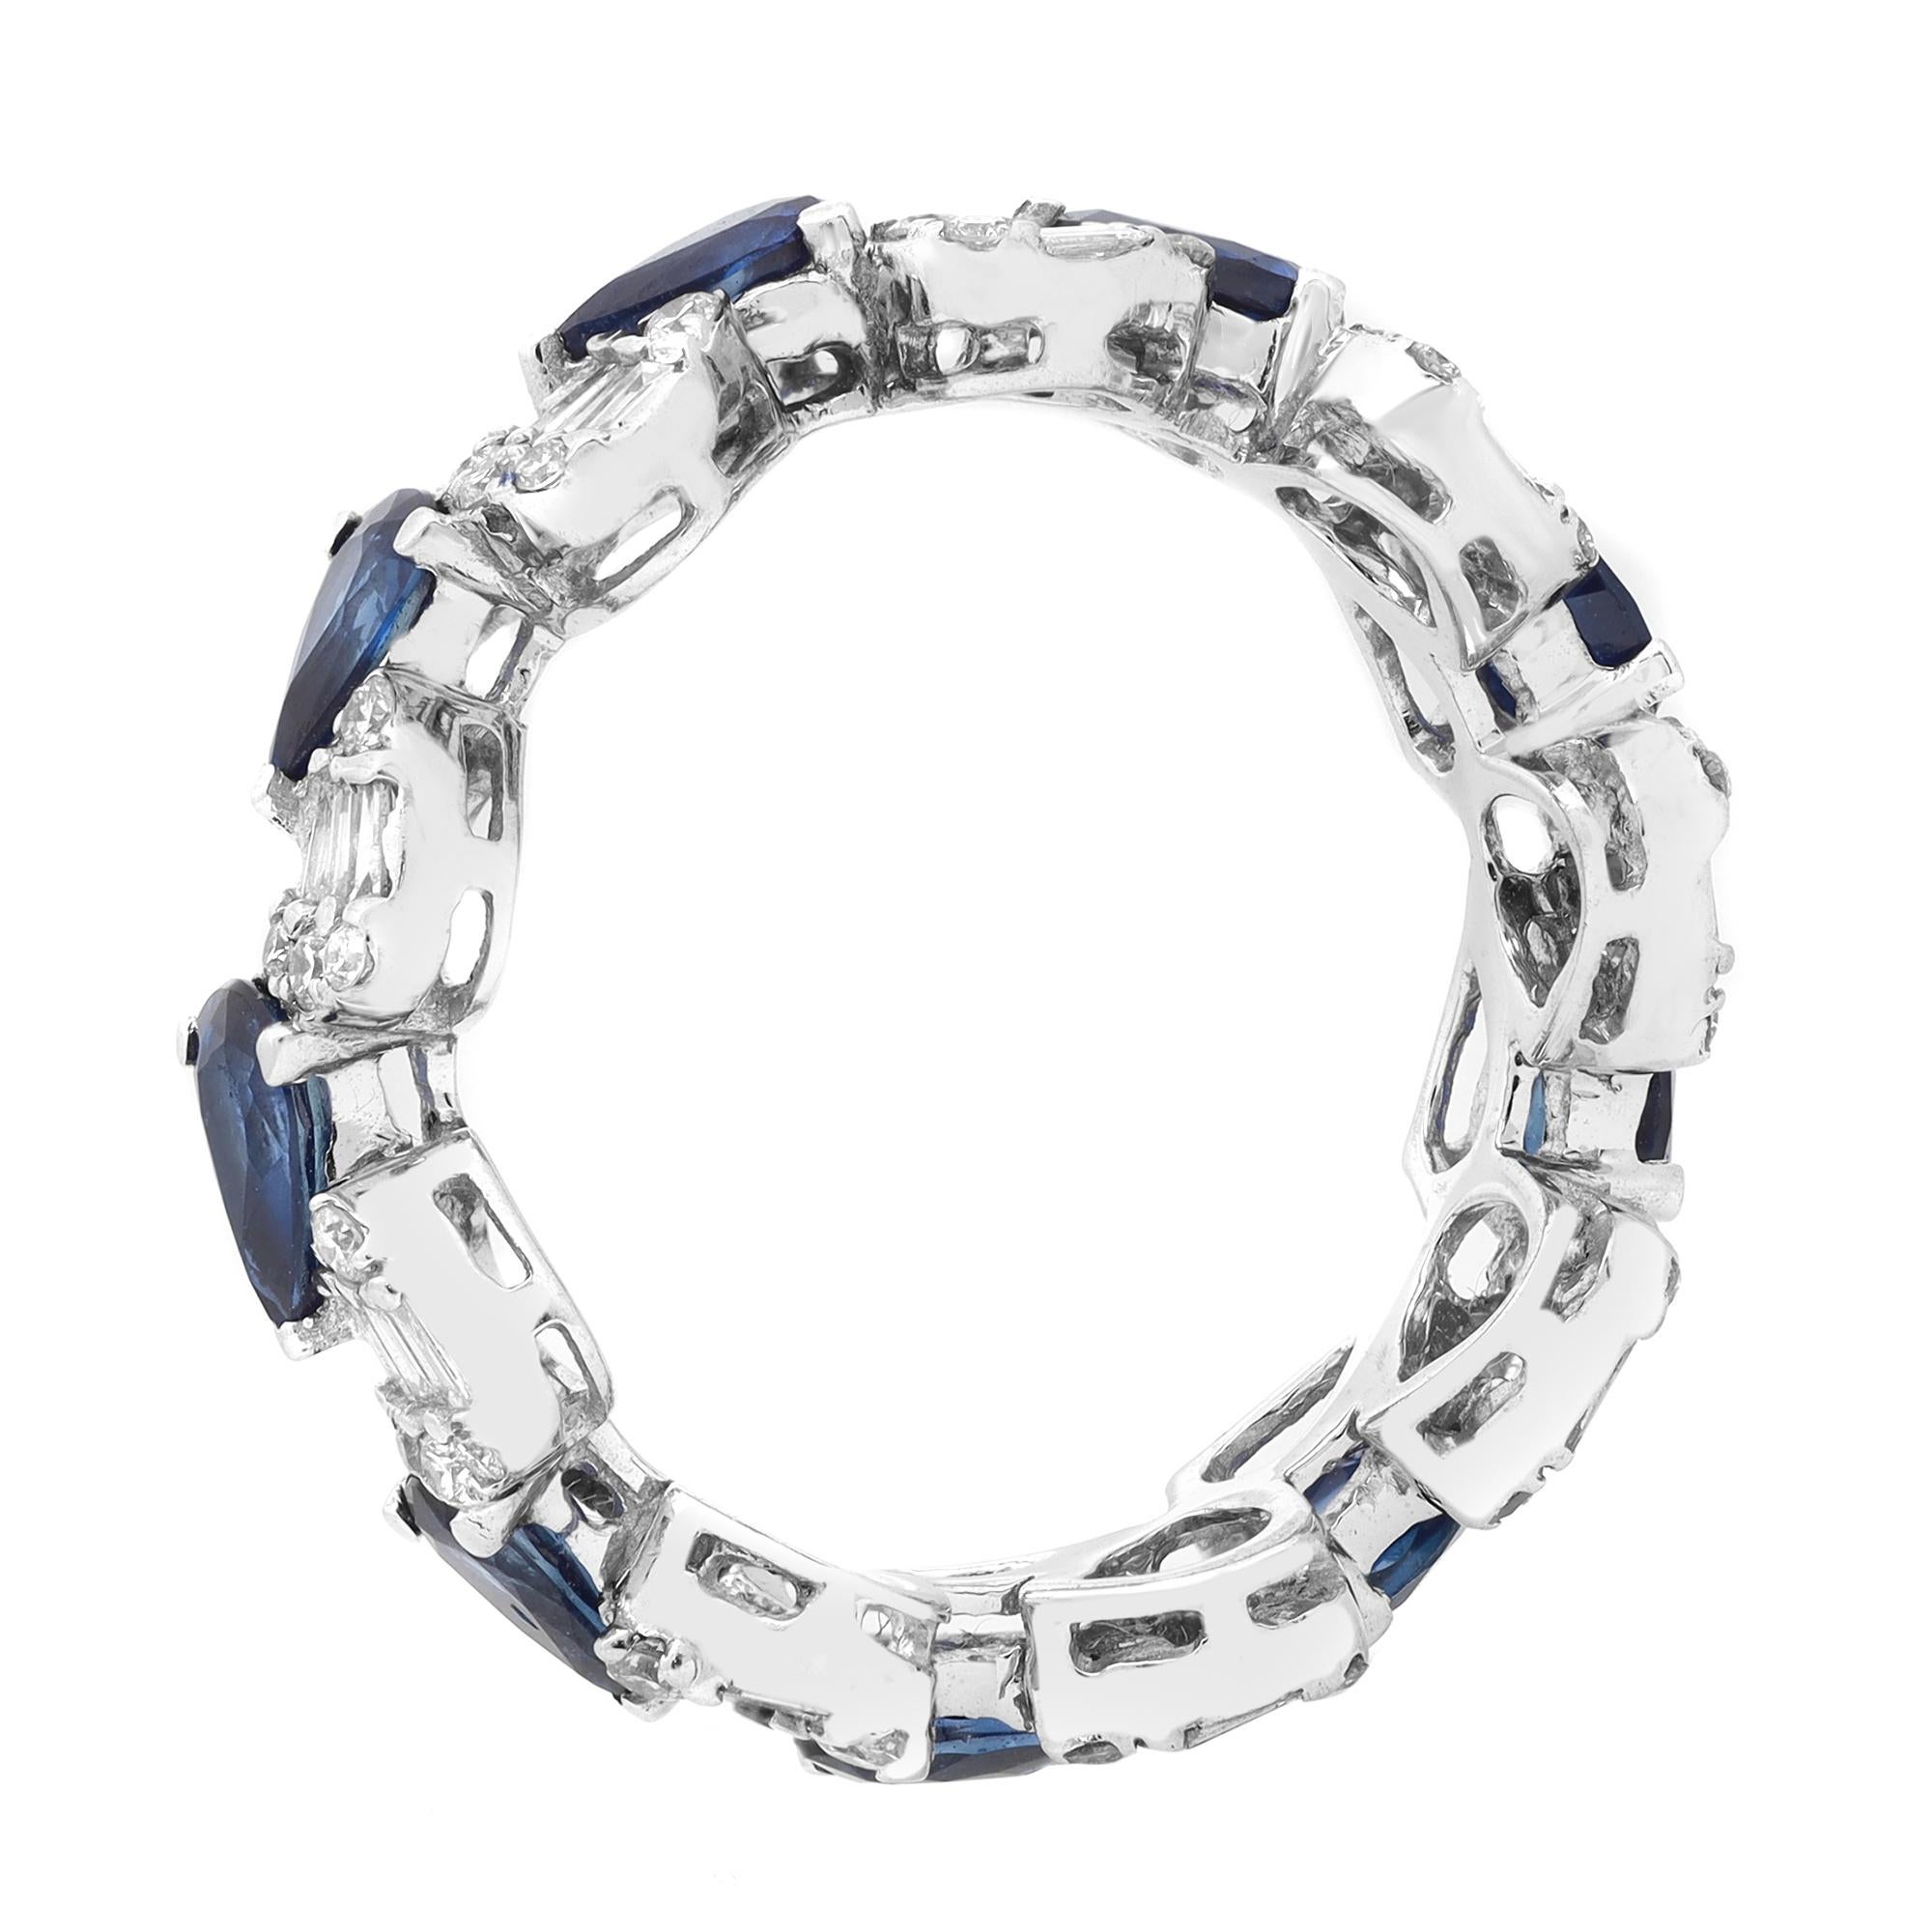 This beautiful eternity band ring features 9 prong set Pear shape scintillating Blue Sapphires alternating with channel set Baguette and Round cut diamonds in pear shaped shank, giving it a spectacular contrast. The stones are beautifully circling